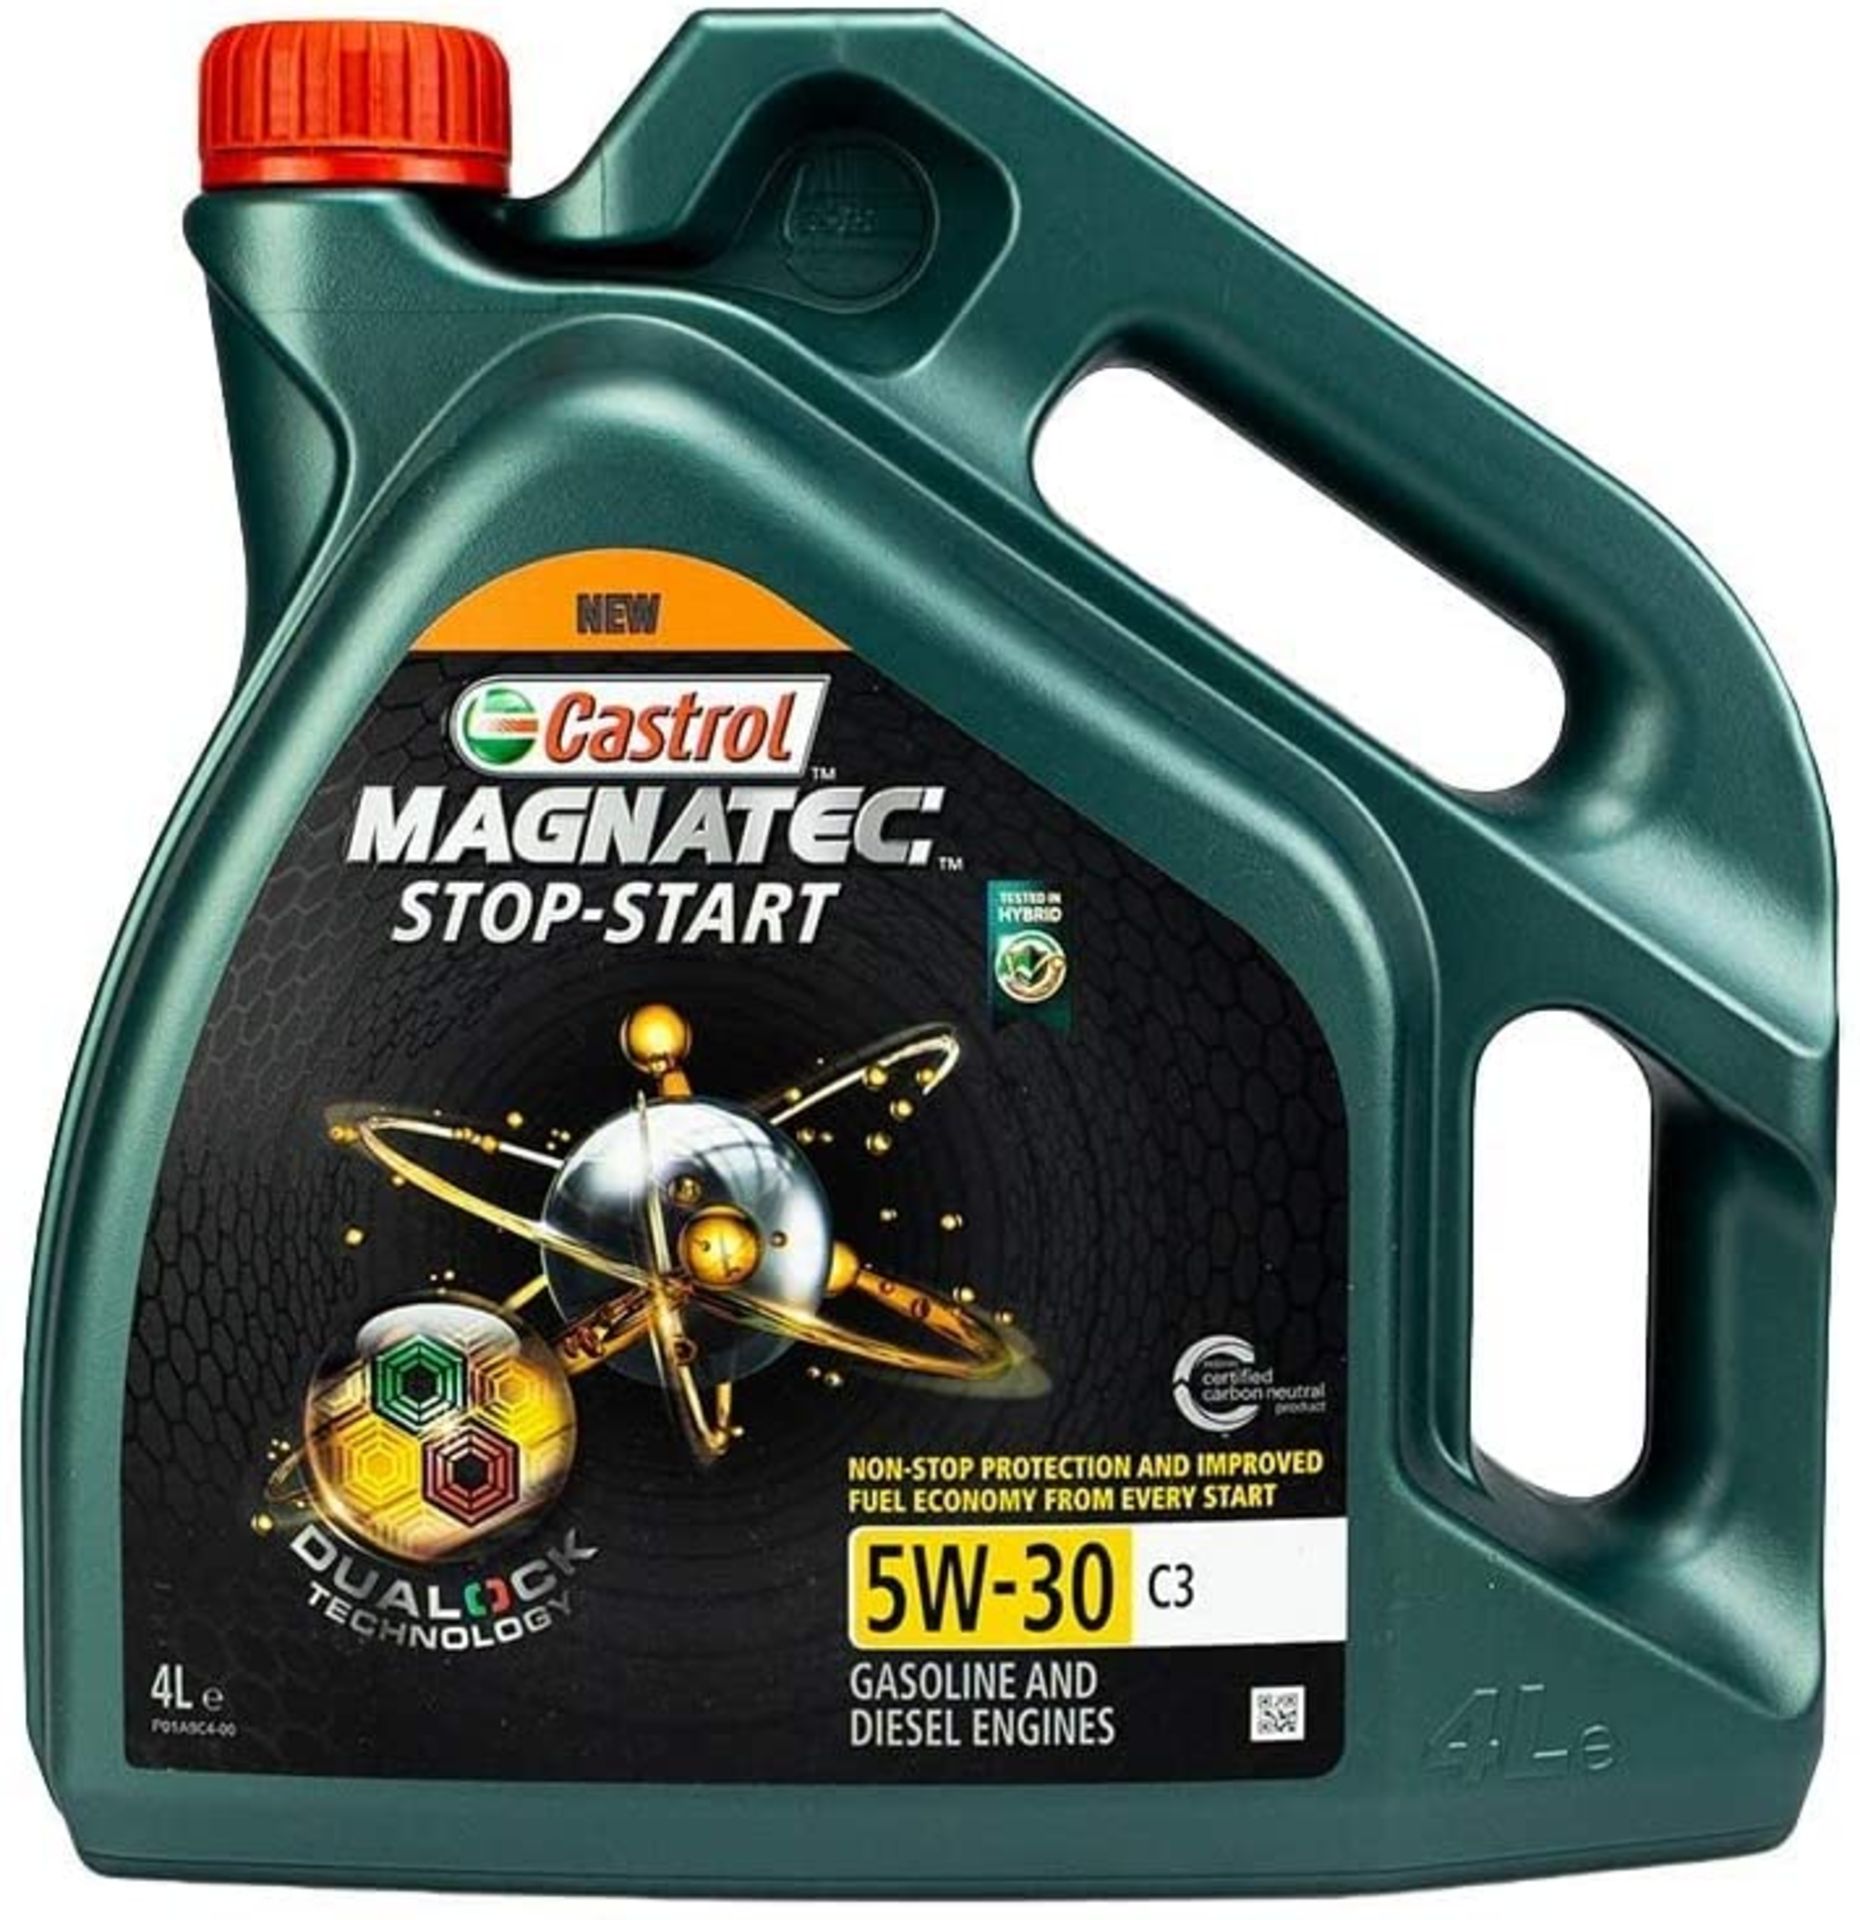 4 X BRAND NEW CASTROL MAGNATEC FULLY SYNTHETIC 5W-30 OIL 4L R1MID